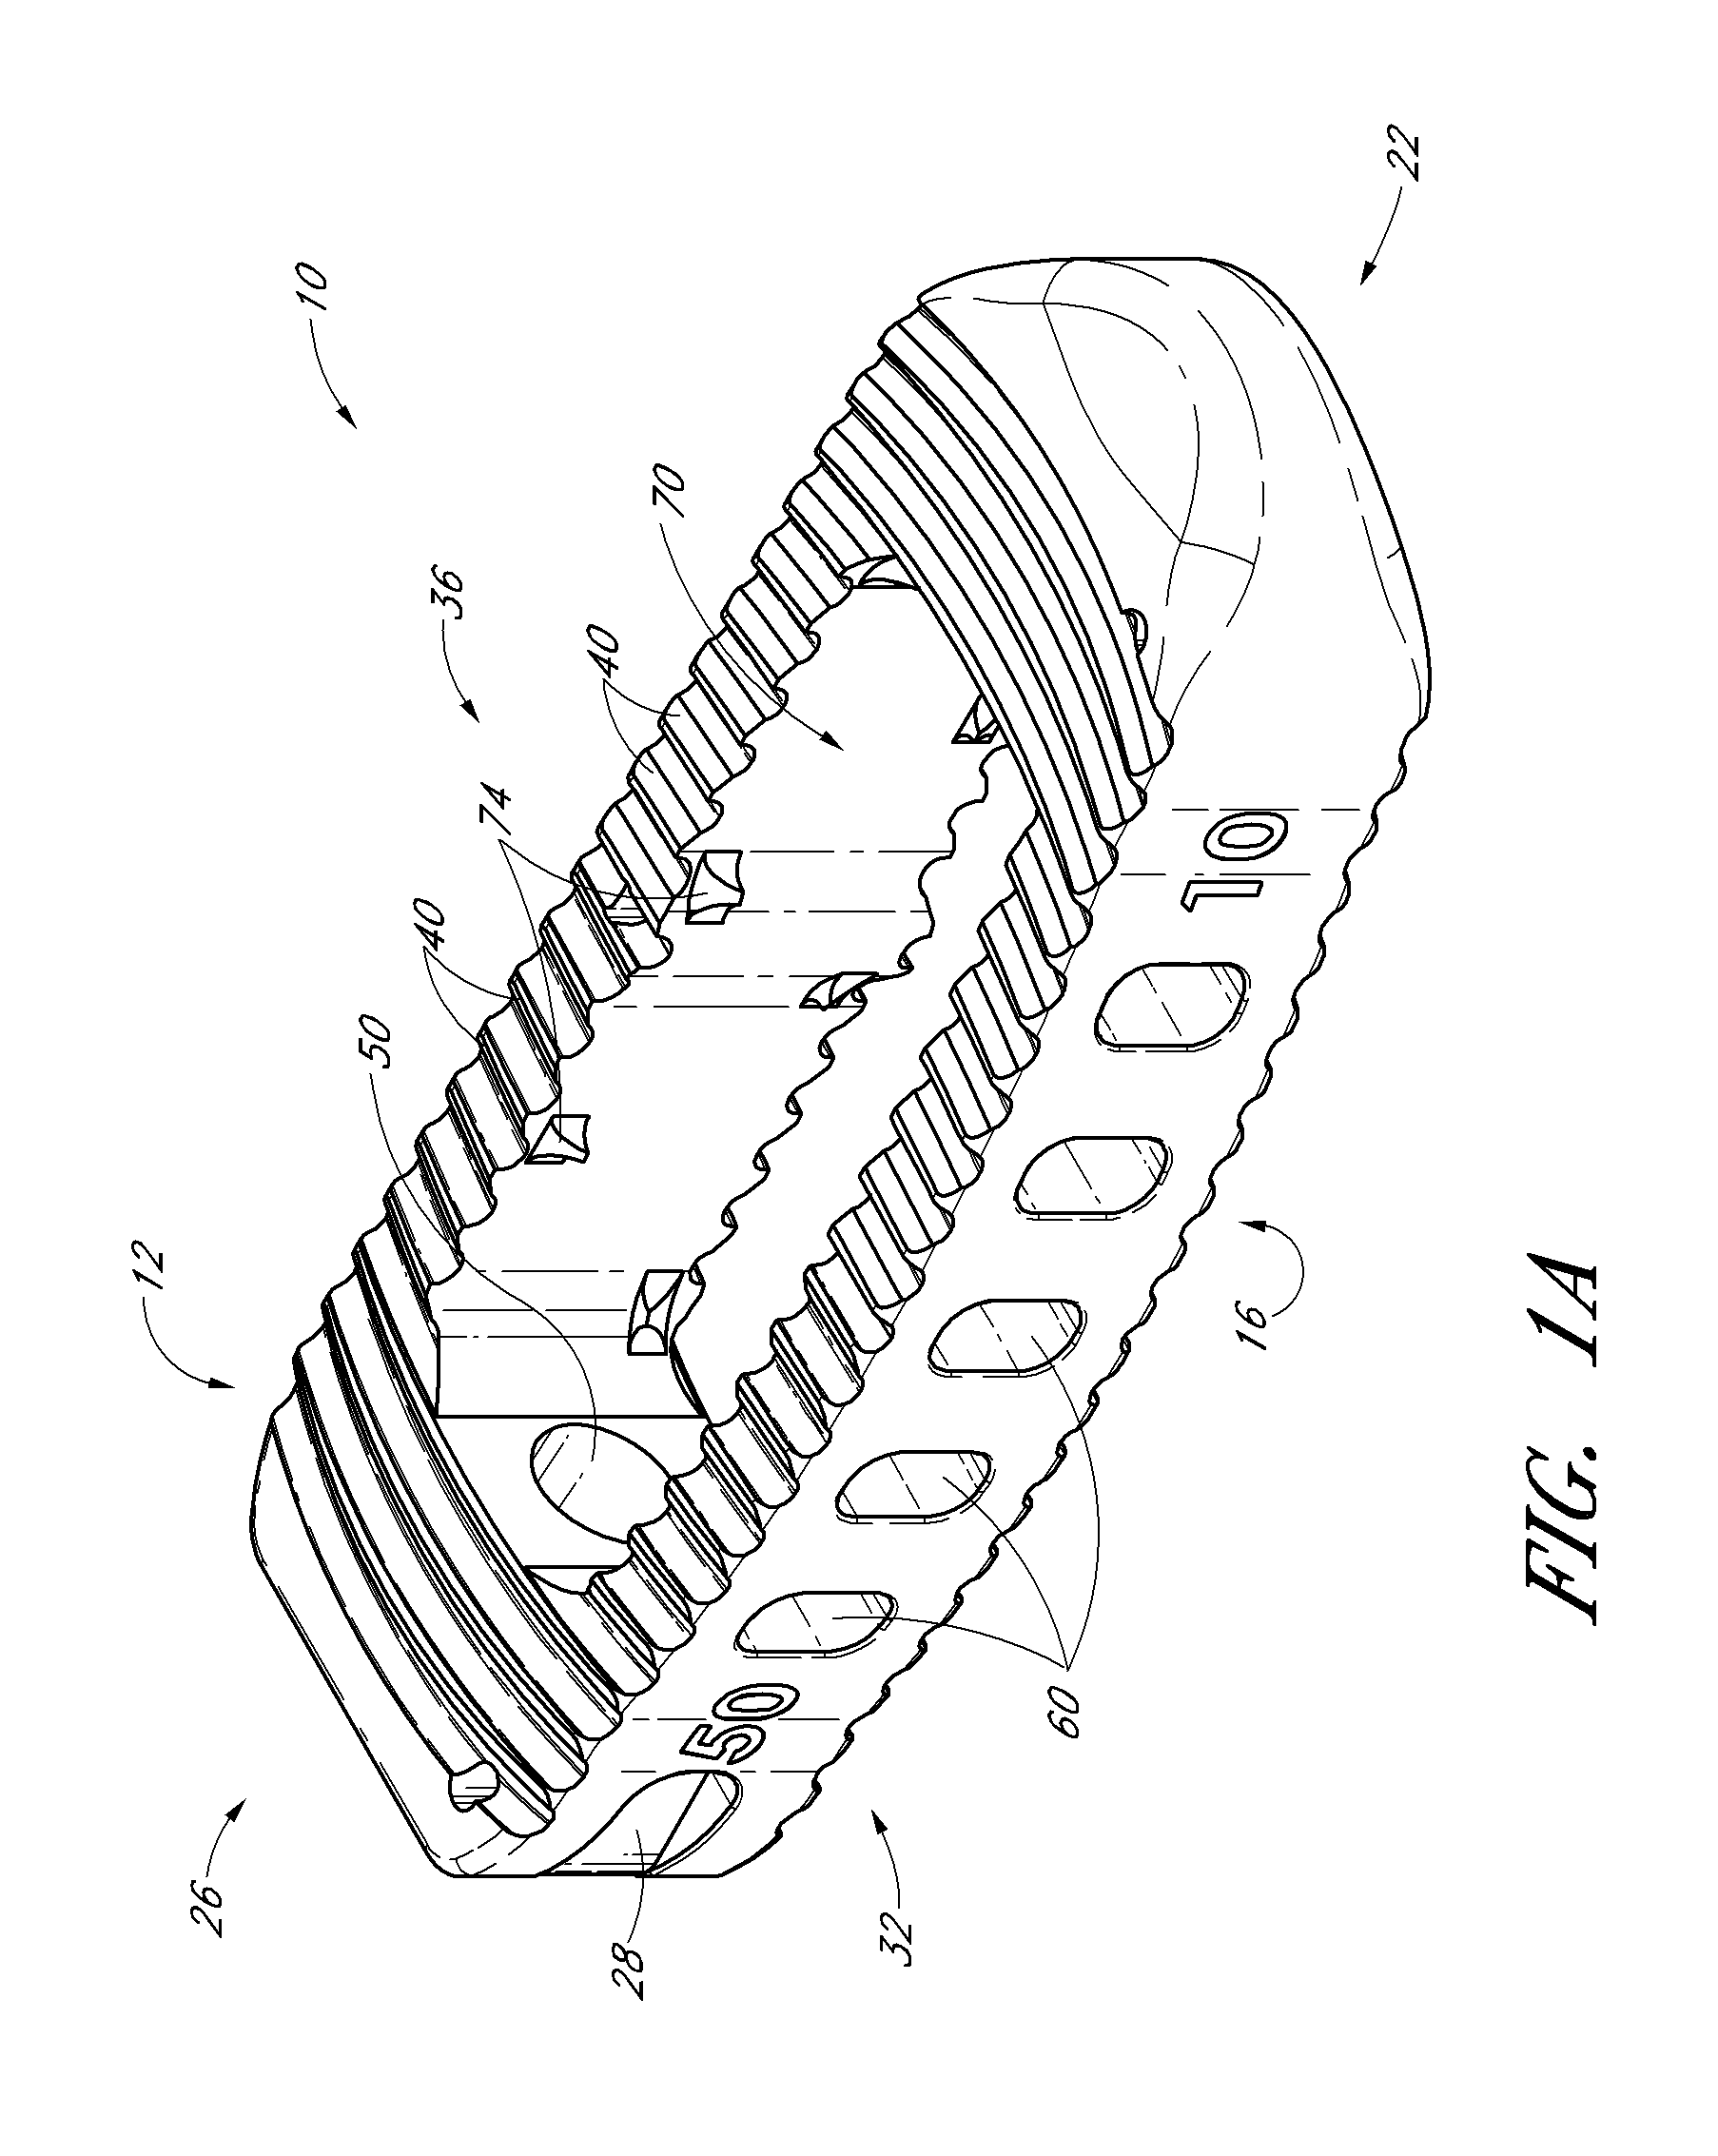 Methods of delivering an implant to an intervertebral space